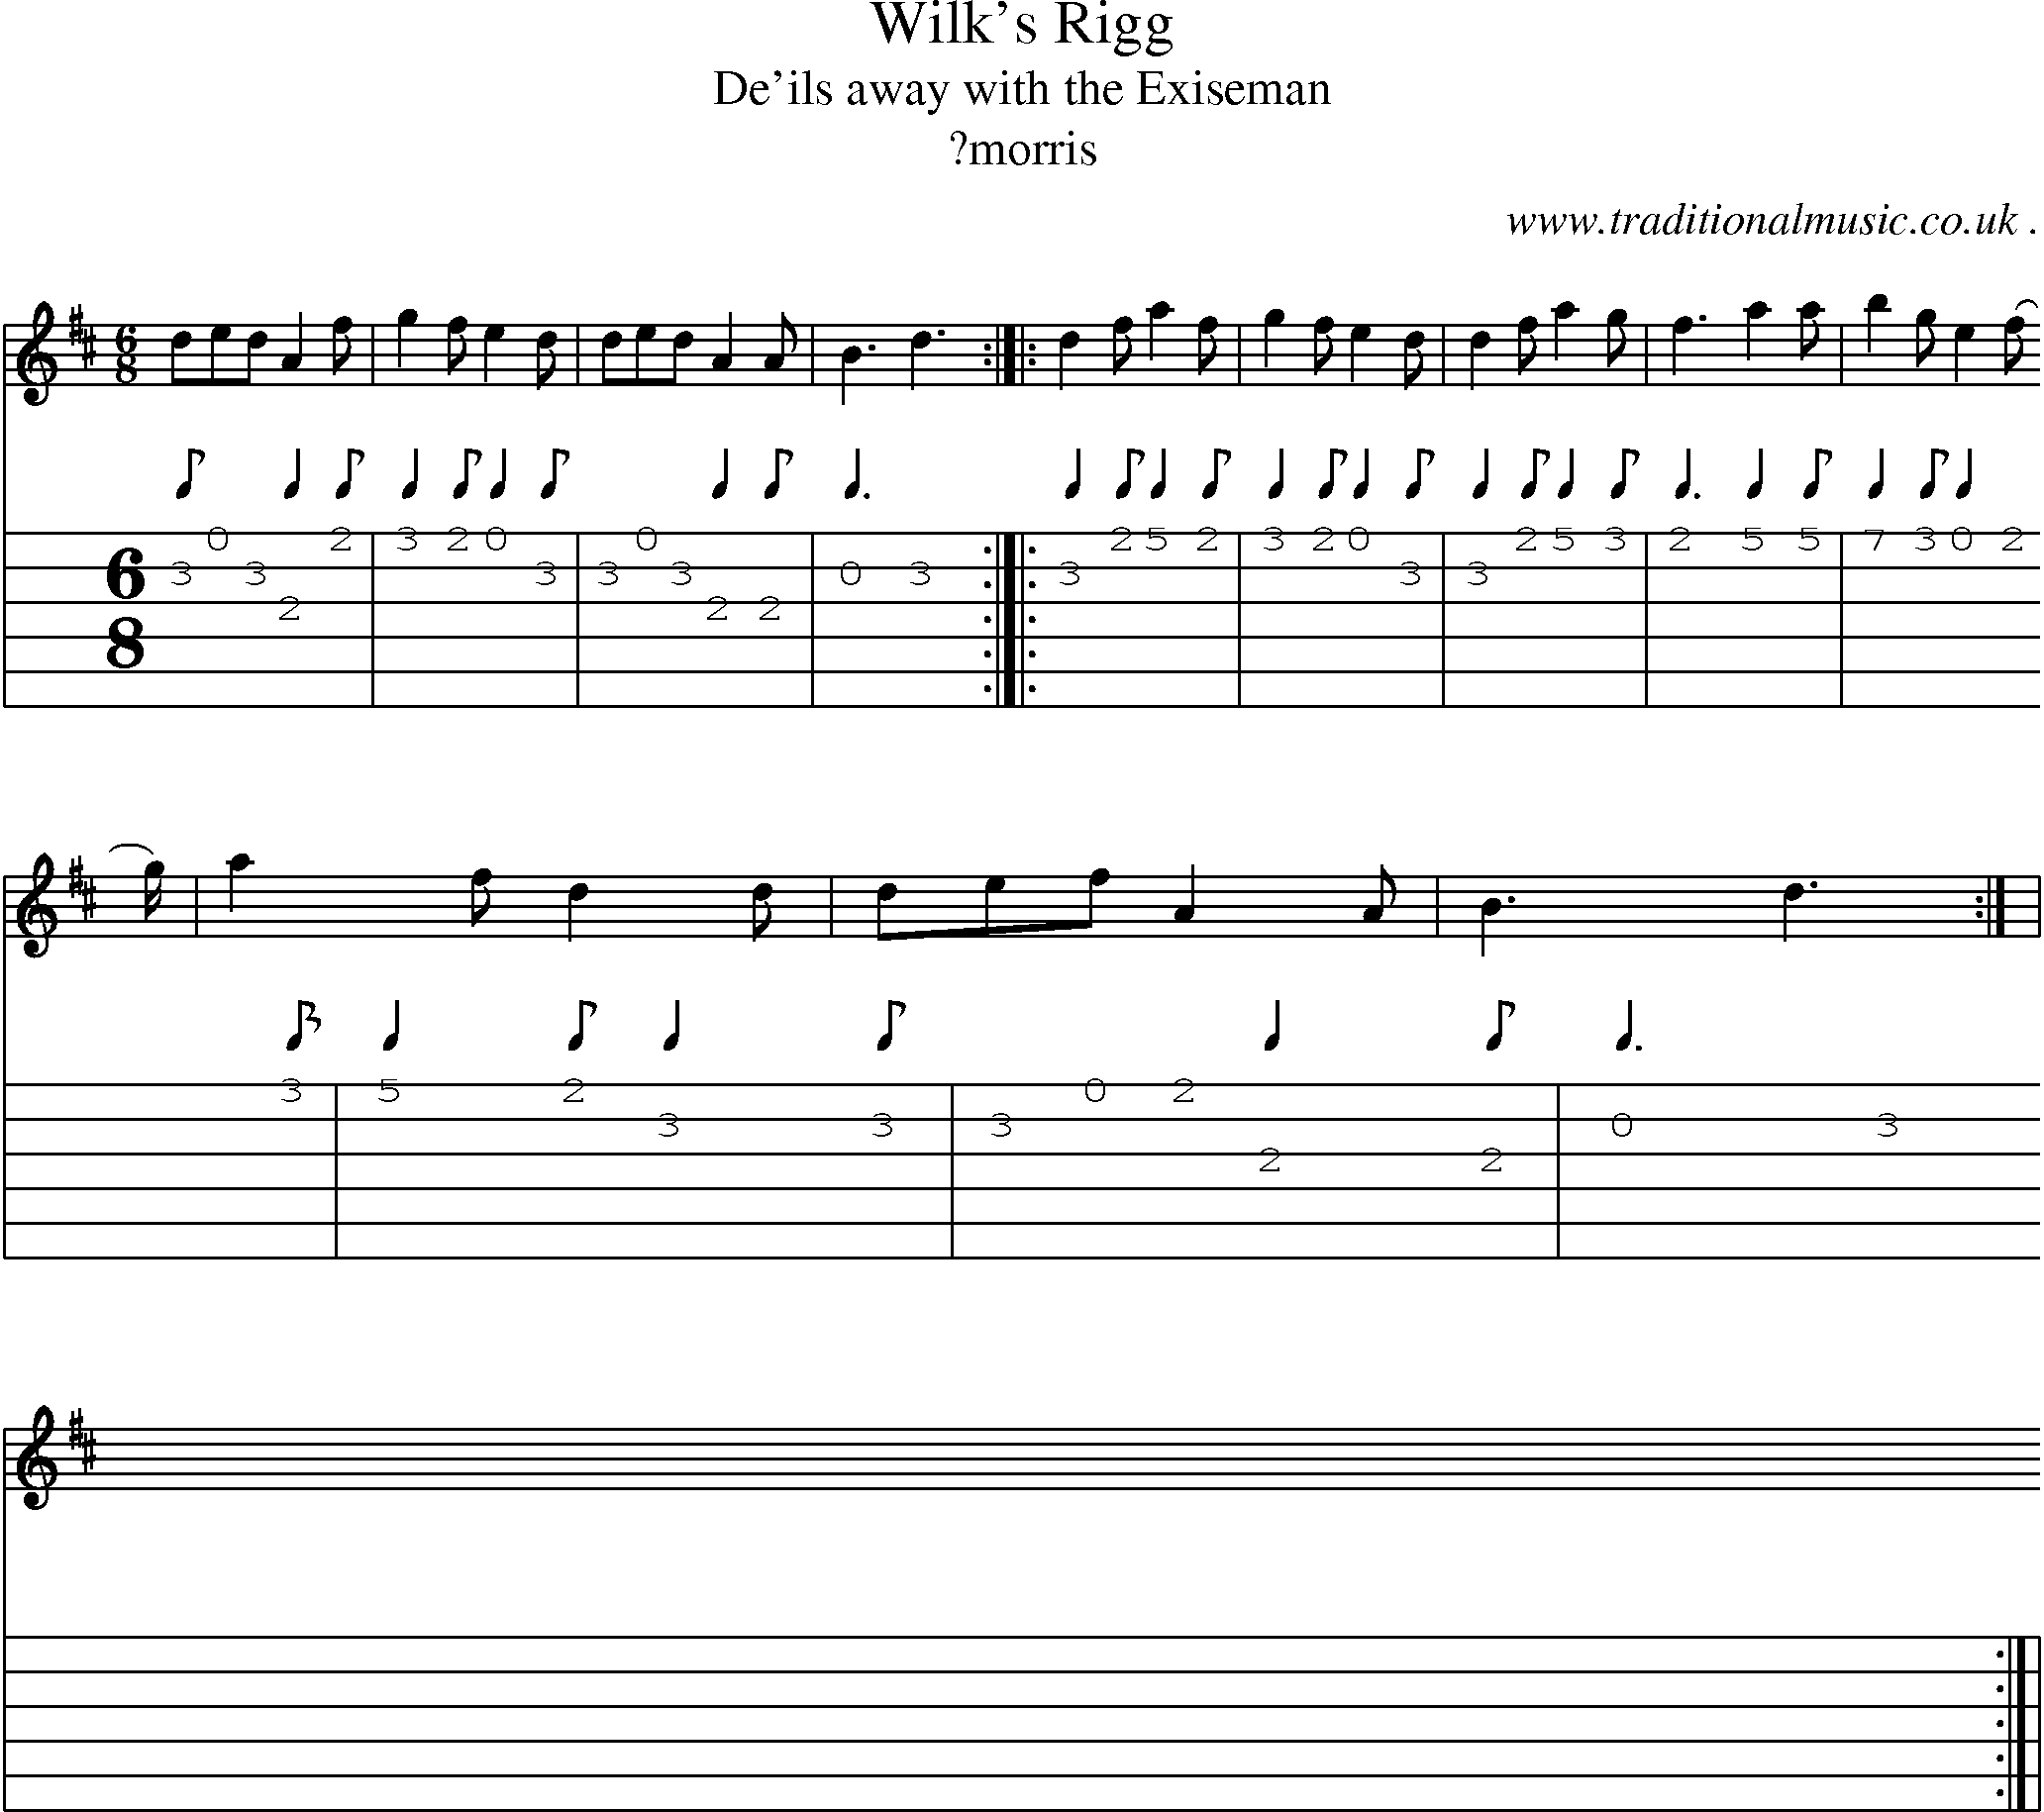 Sheet-Music and Guitar Tabs for Wilks Rigg